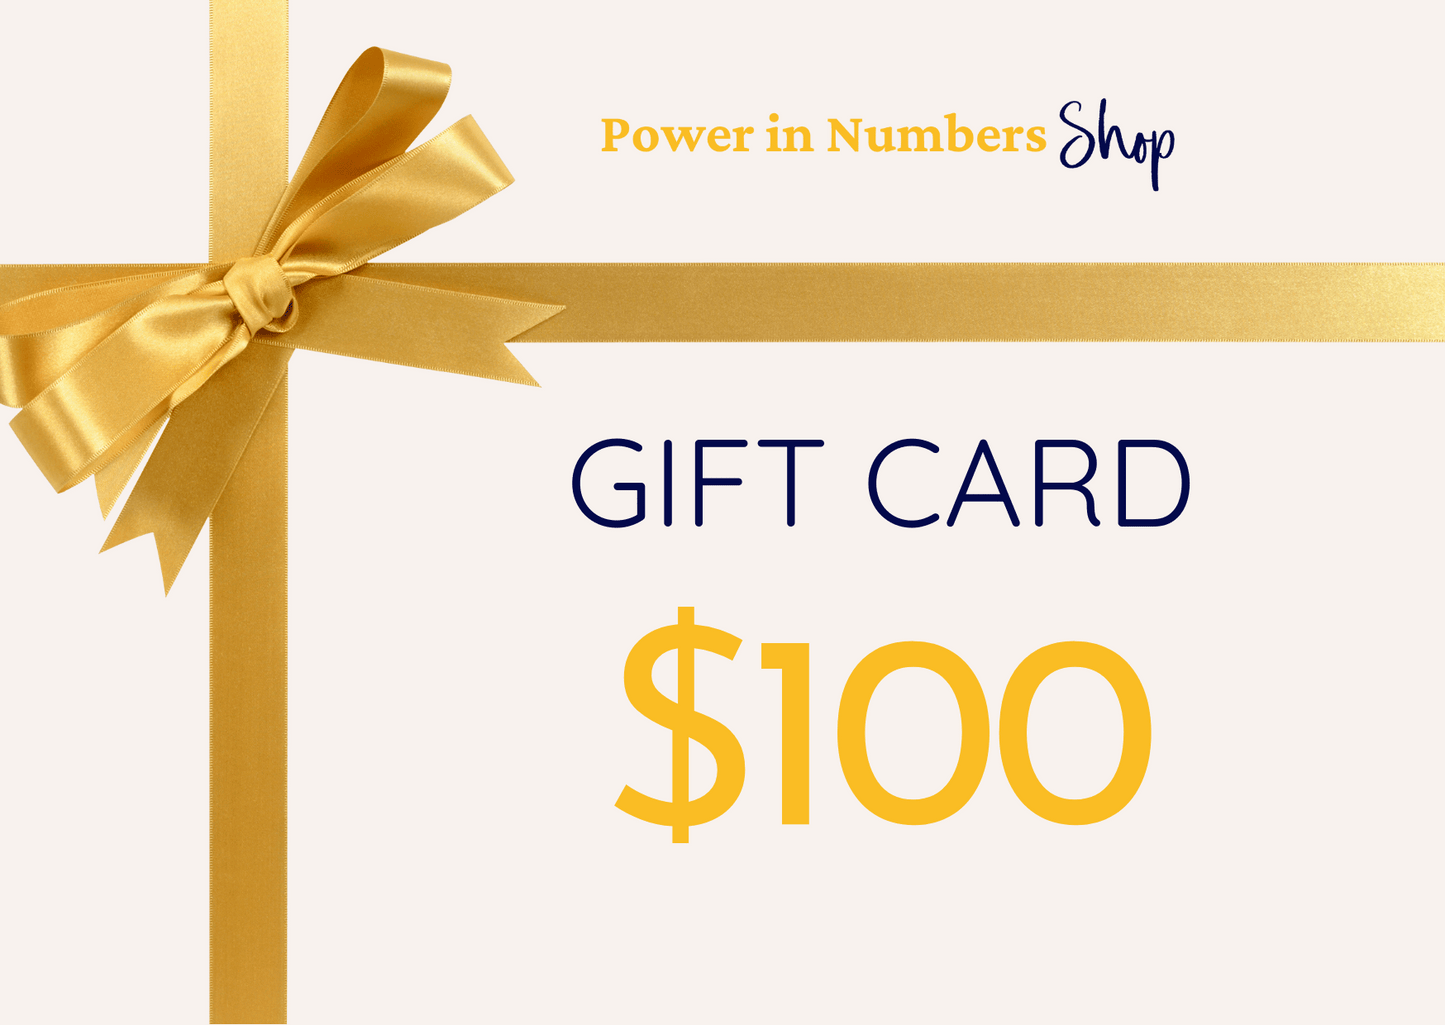 Gift Financial Literacy $100 gift card symbolizing a significant investment in one's financial knowledge